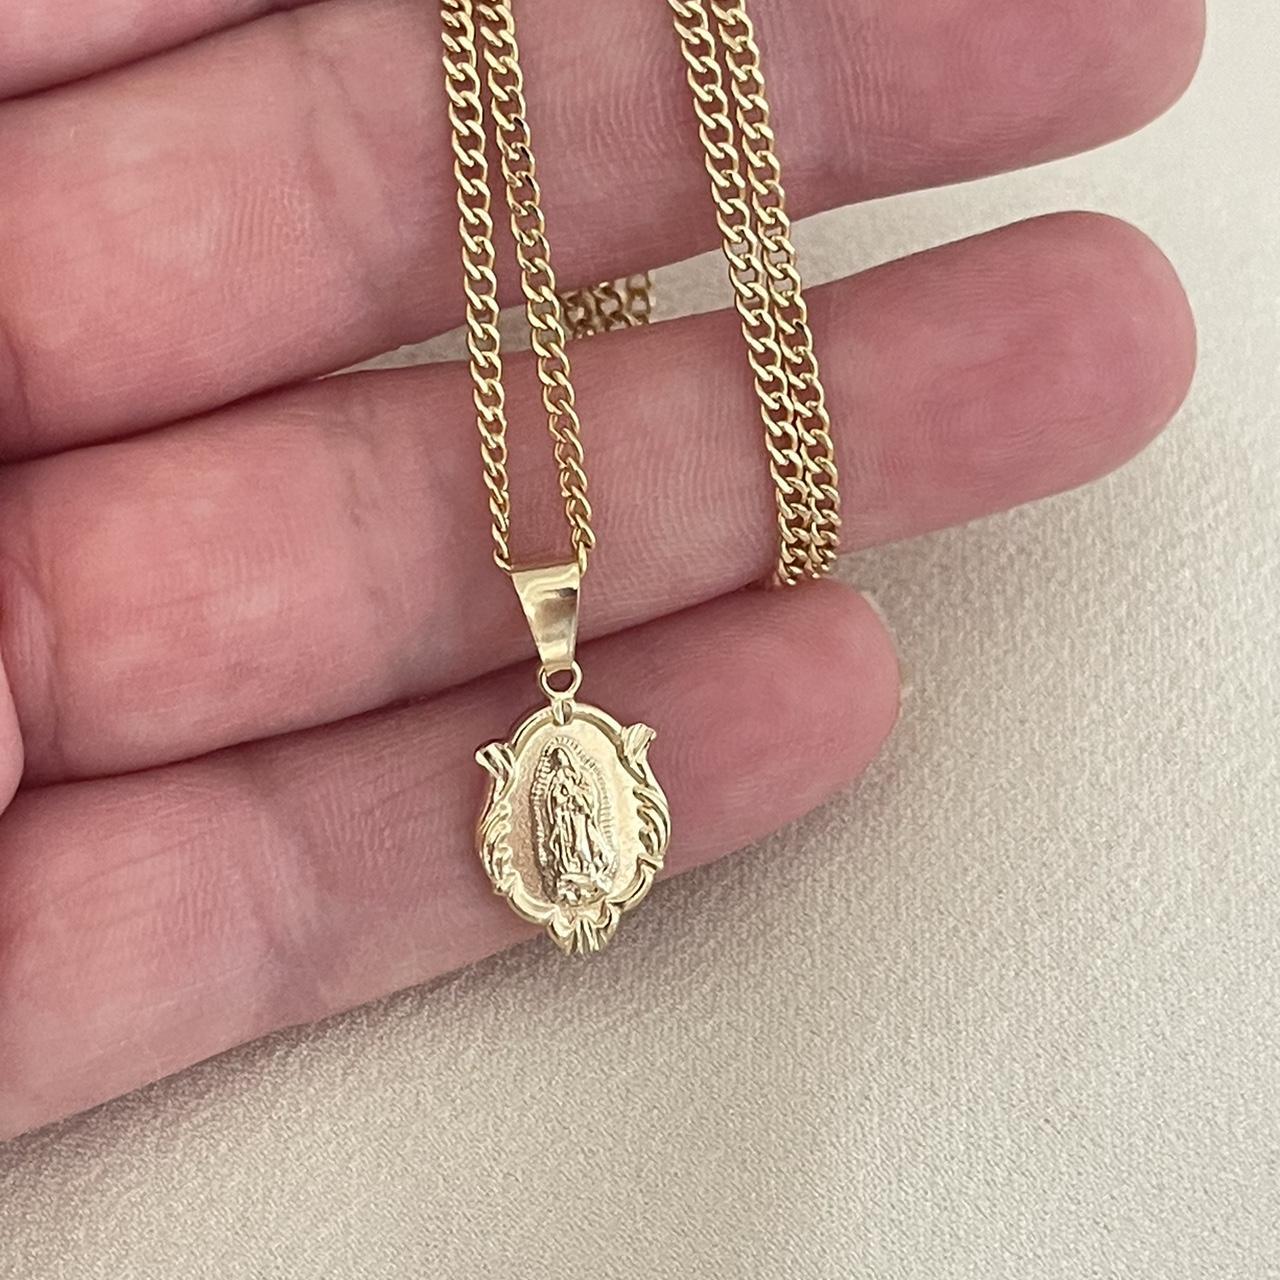 Amazon.com: Religious Jewelry by FDJ 10k Yellow Gold Our Lady of Guadalupe  Pendant Necklace With Diamonds 16